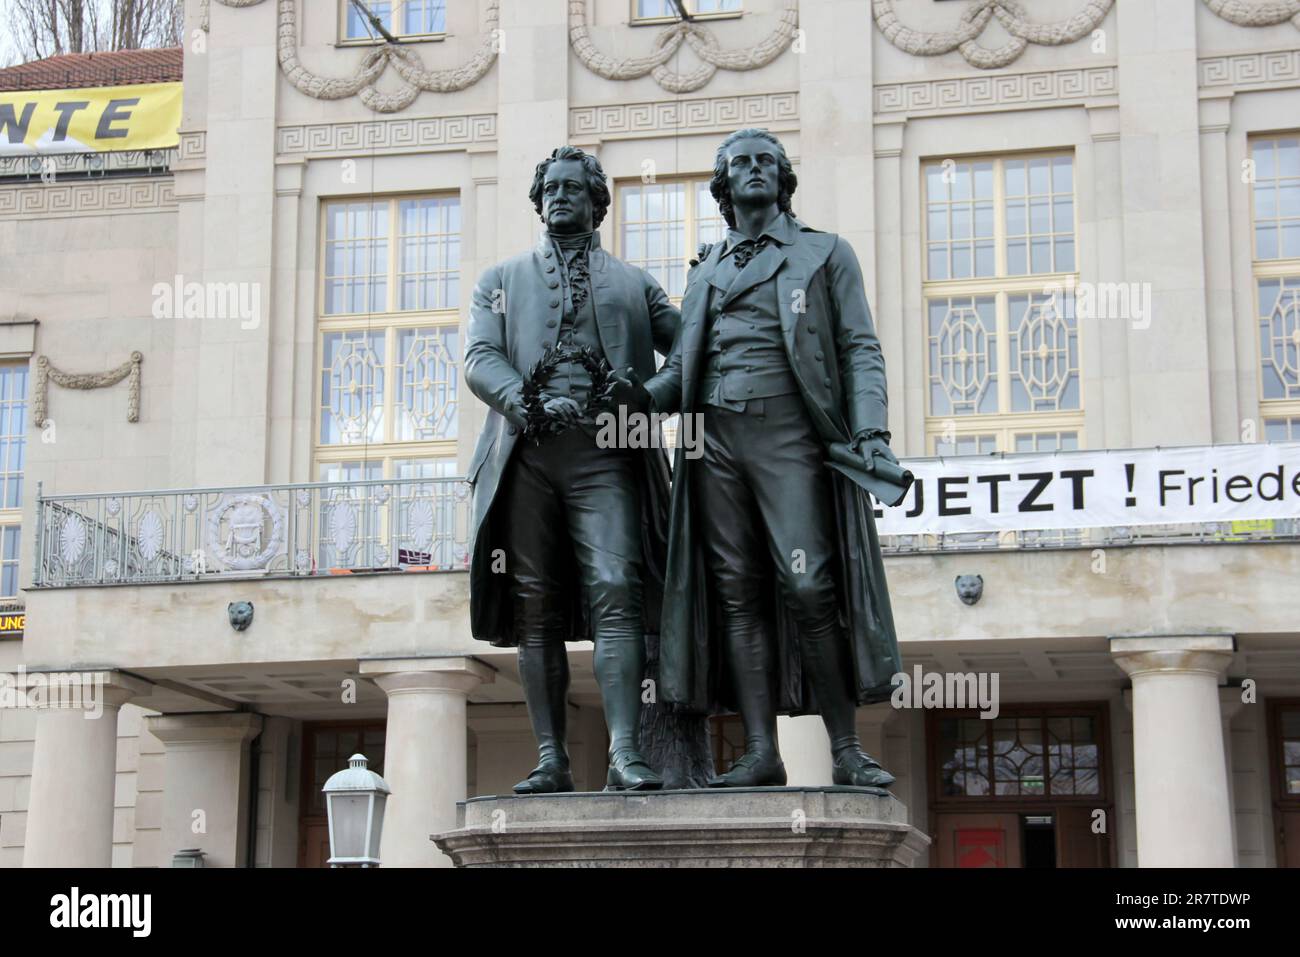 Goethe-Schiller monument in front of the German National Theater, sculptural work by Ernst Rietschel, created in 1857, Weimar, Germany Stock Photo